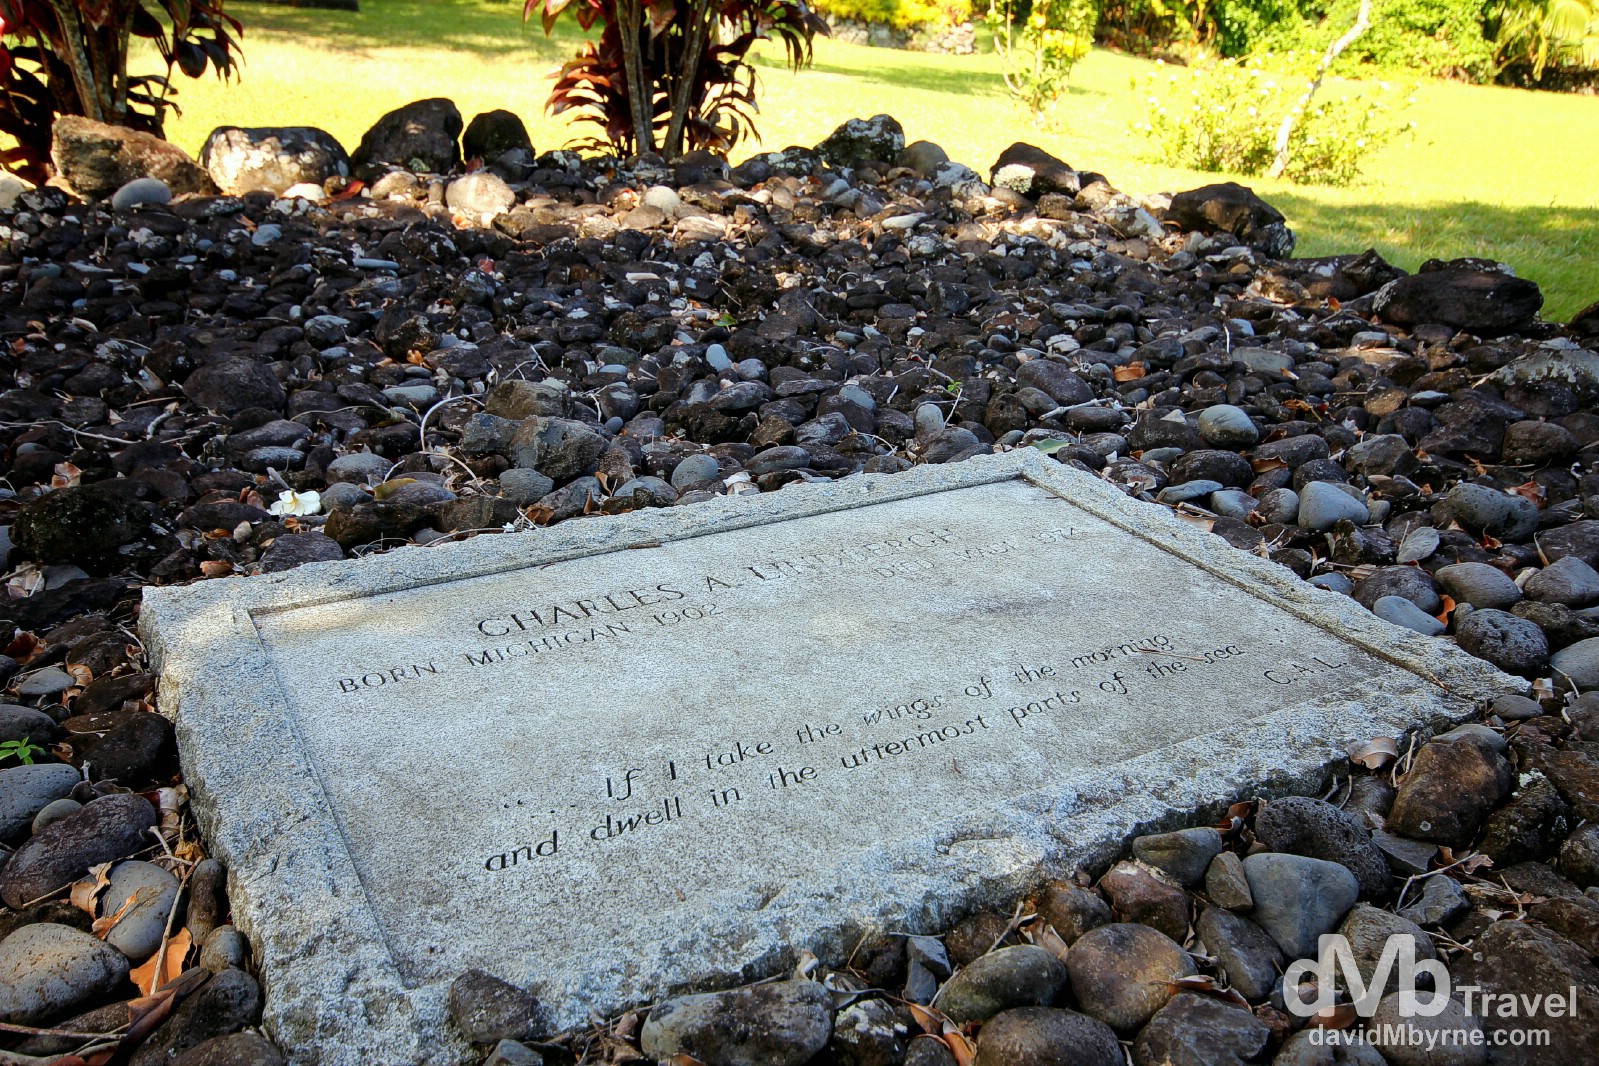 The grave of Charles Lindbergh in the grounds of Palapala Ho'Omau Church, Maui, a stop on Valley Isle Excursion's 'Road To Hana' tour. Maui, Hawaii, USA. March 7th 2103.